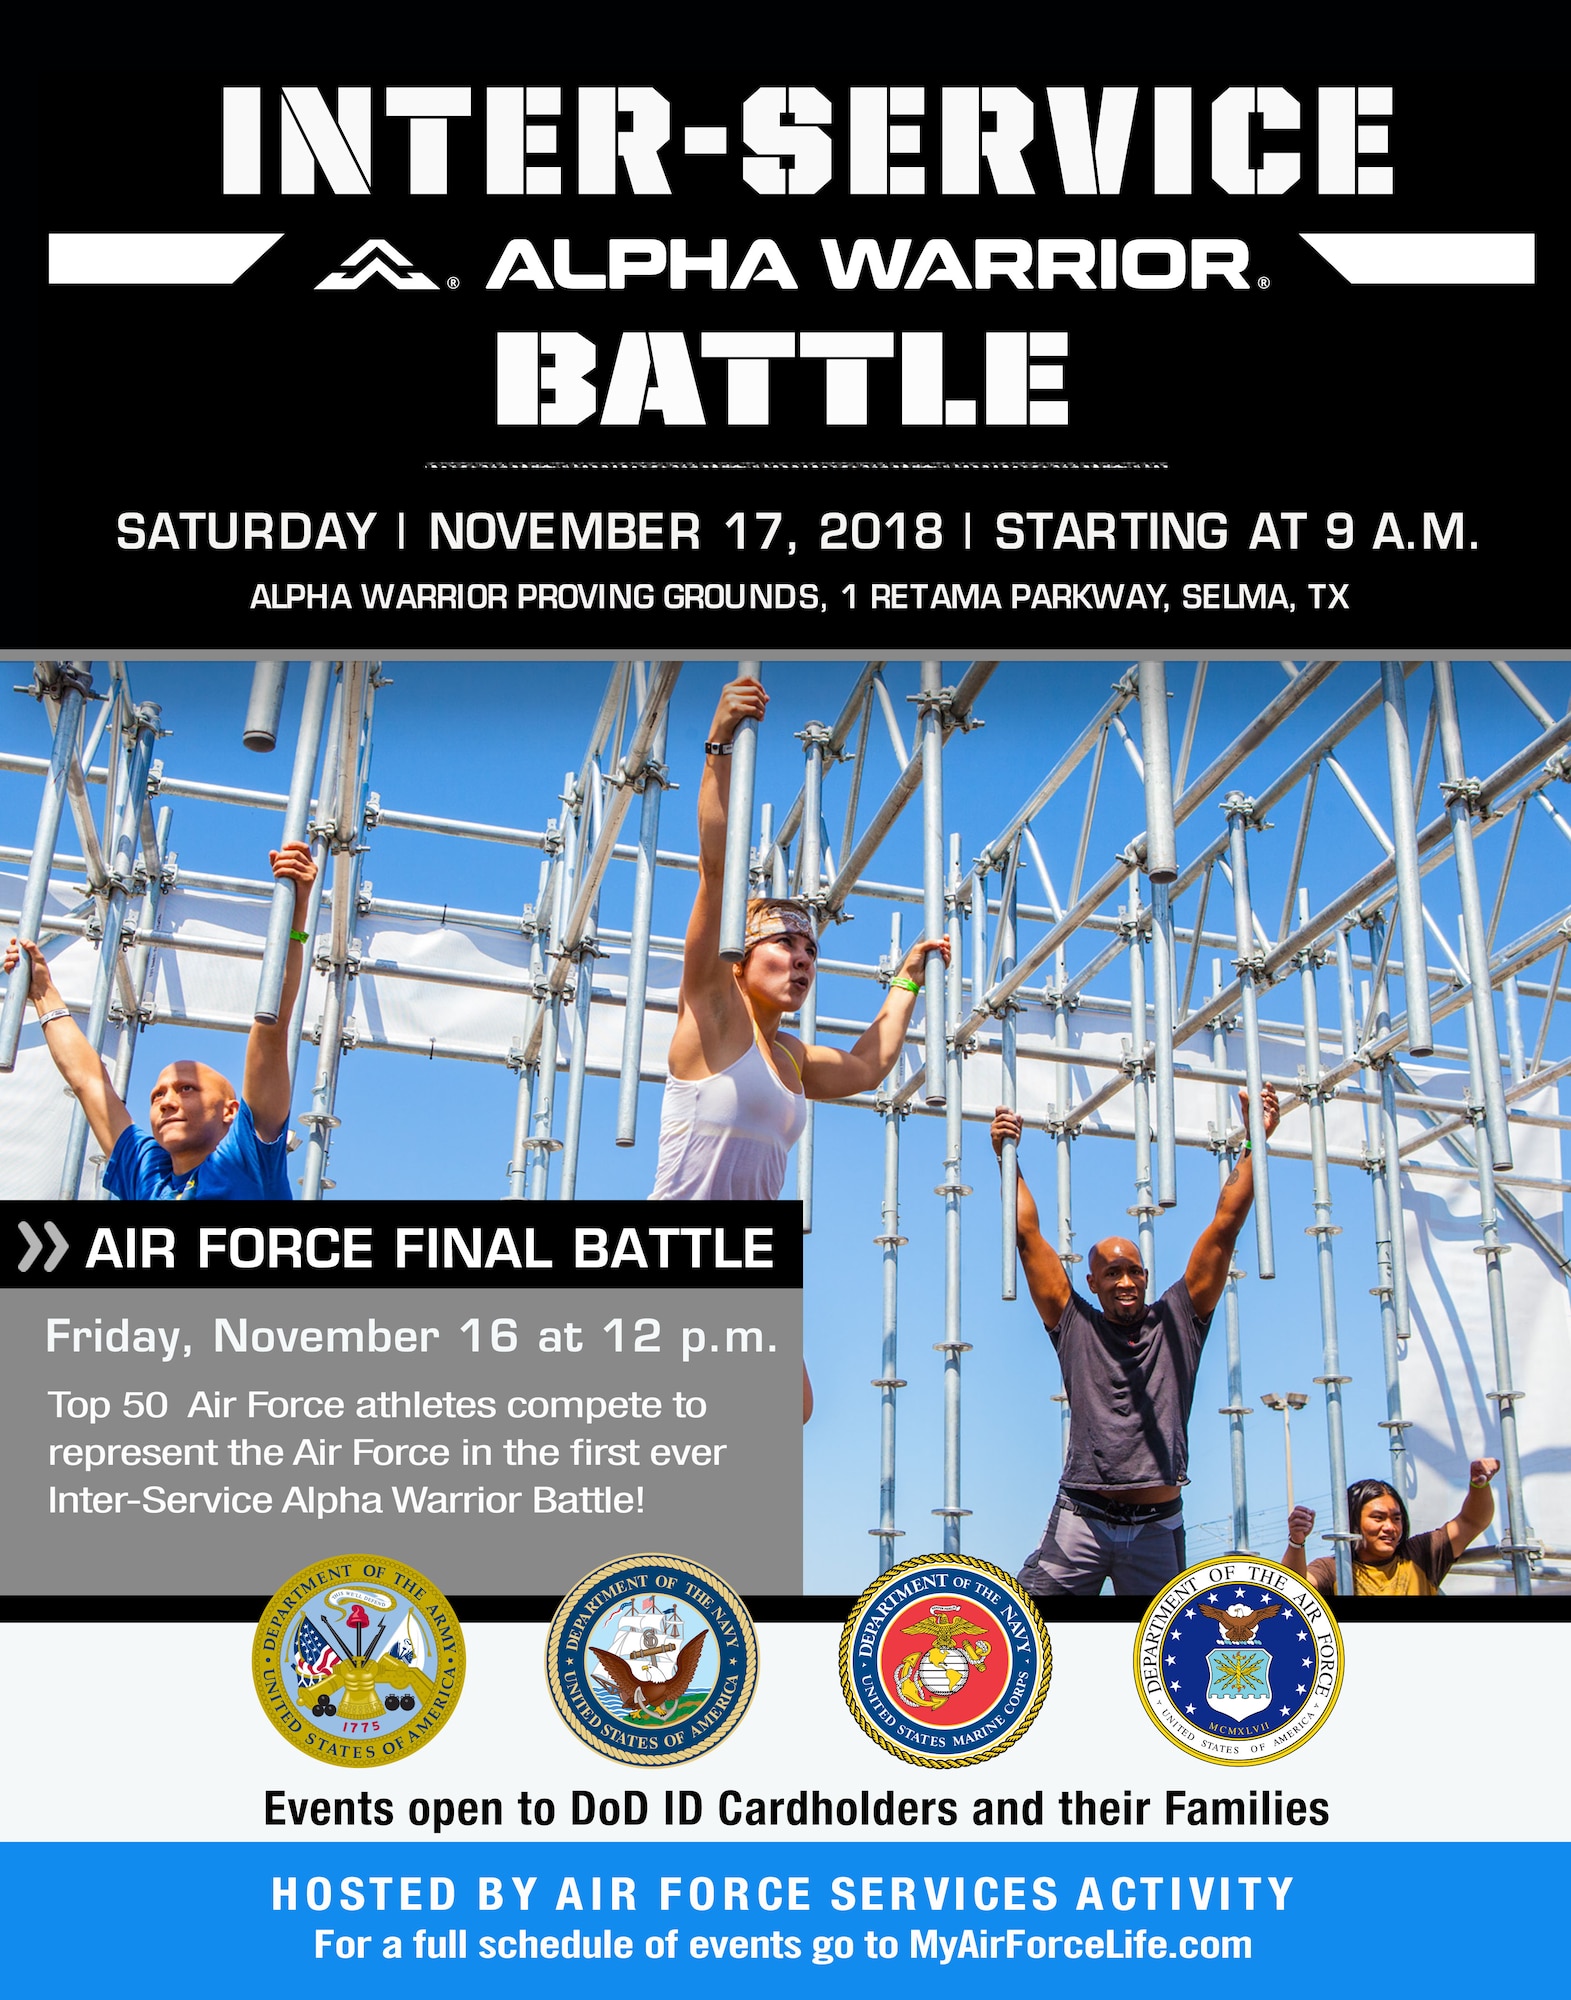 JOINT BASE SAN ANTONIO-LACKLAND, Texas – The 2018 Alpha Warrior Final Battle will feature the first ever inter-service competition with Airmen, Soldiers and Sailors competing Nov. 16-17 at Retama Park in Selma, Texas.